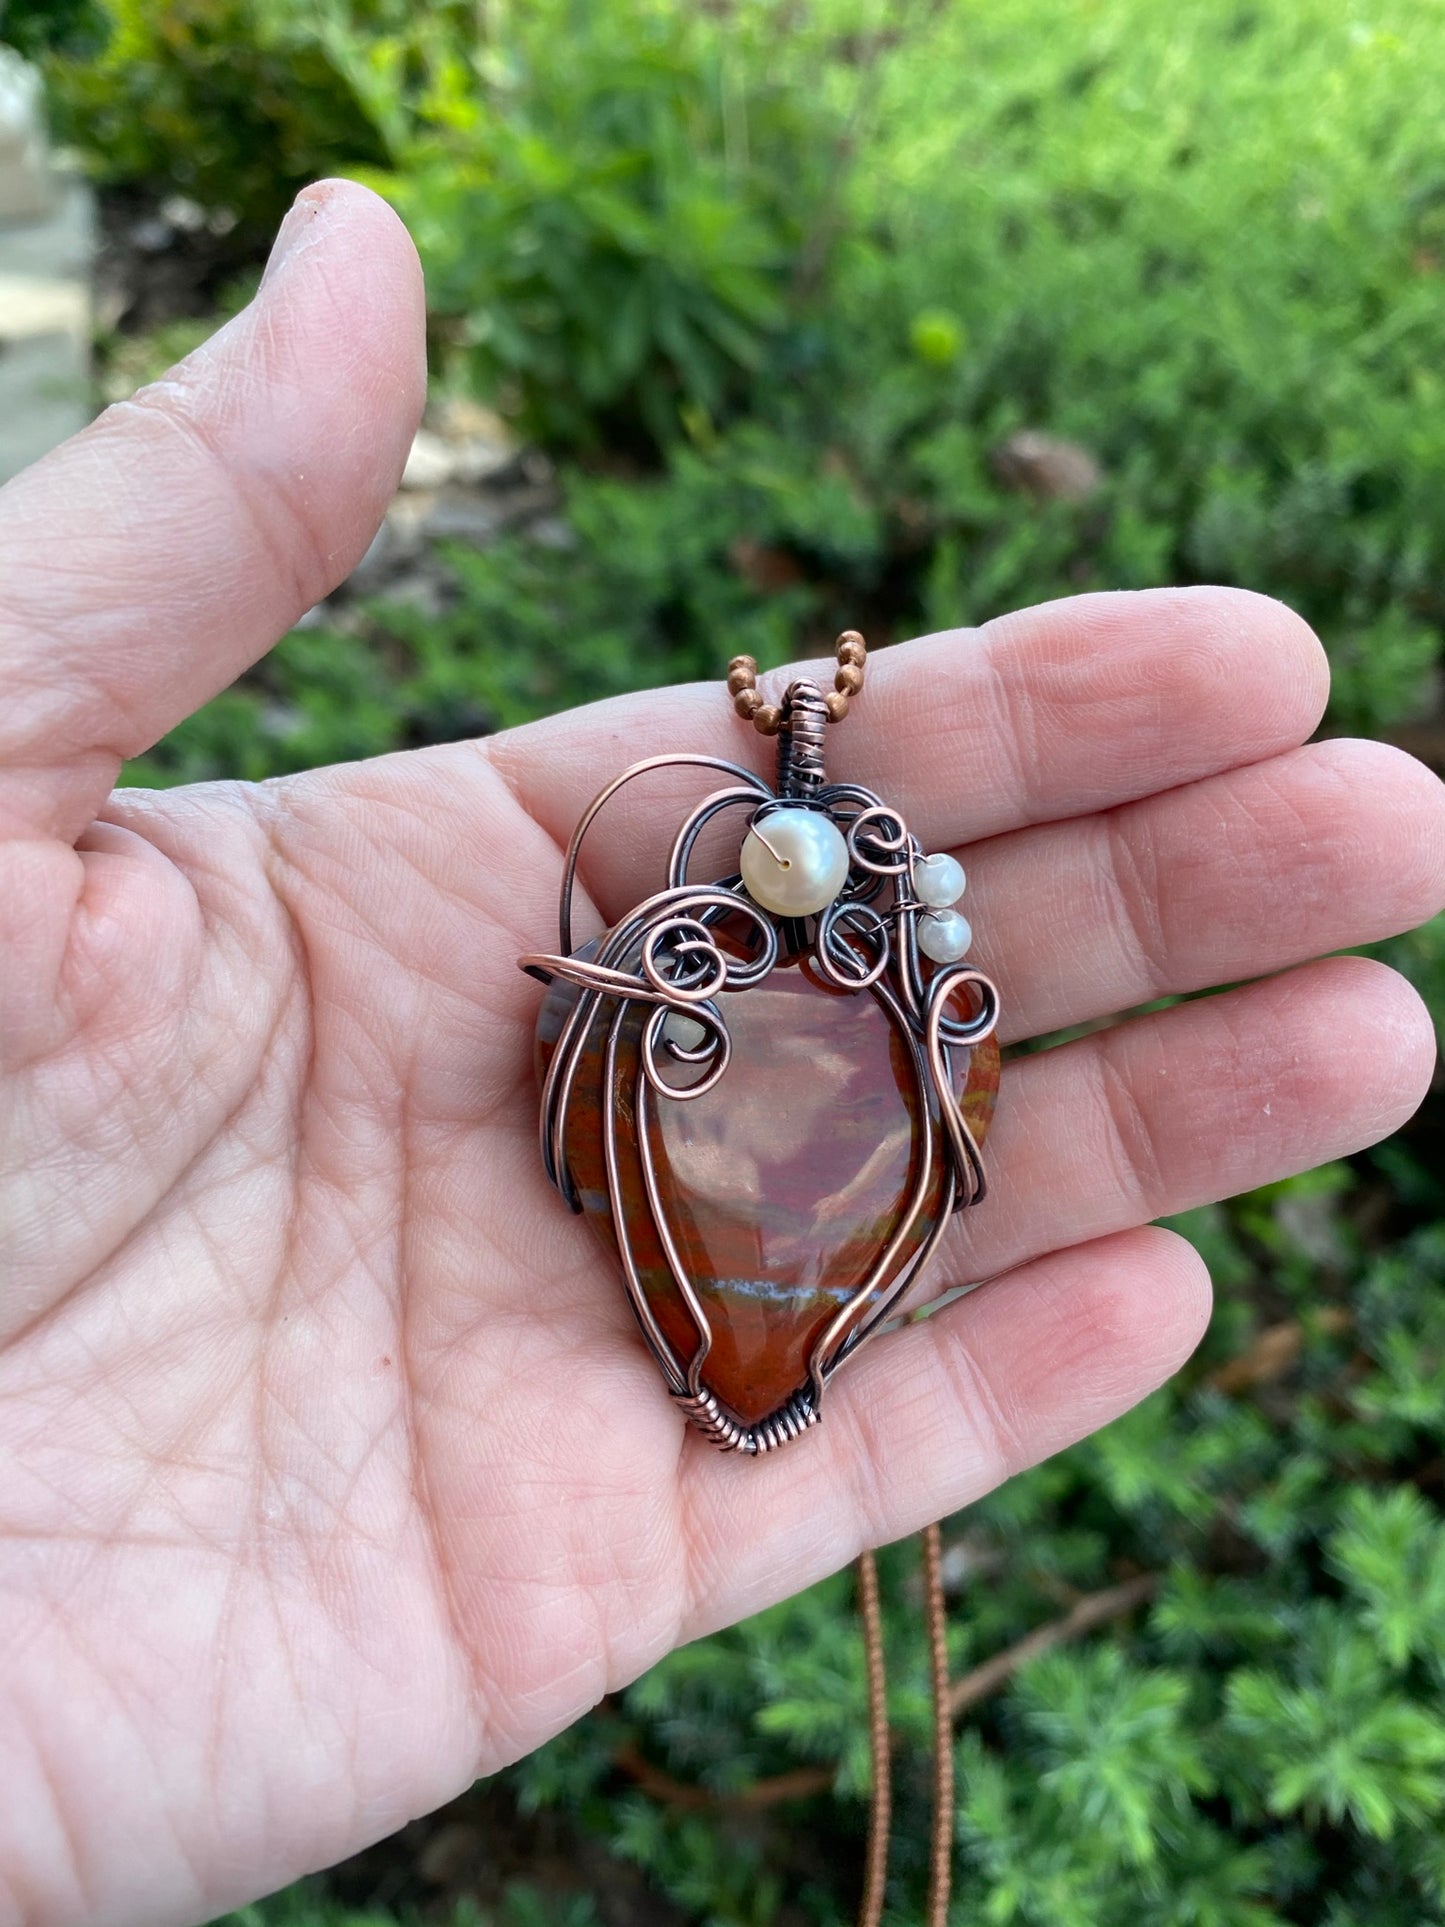 Heart Shaped Agate Pendant Wire Wrapped In Antique Copper